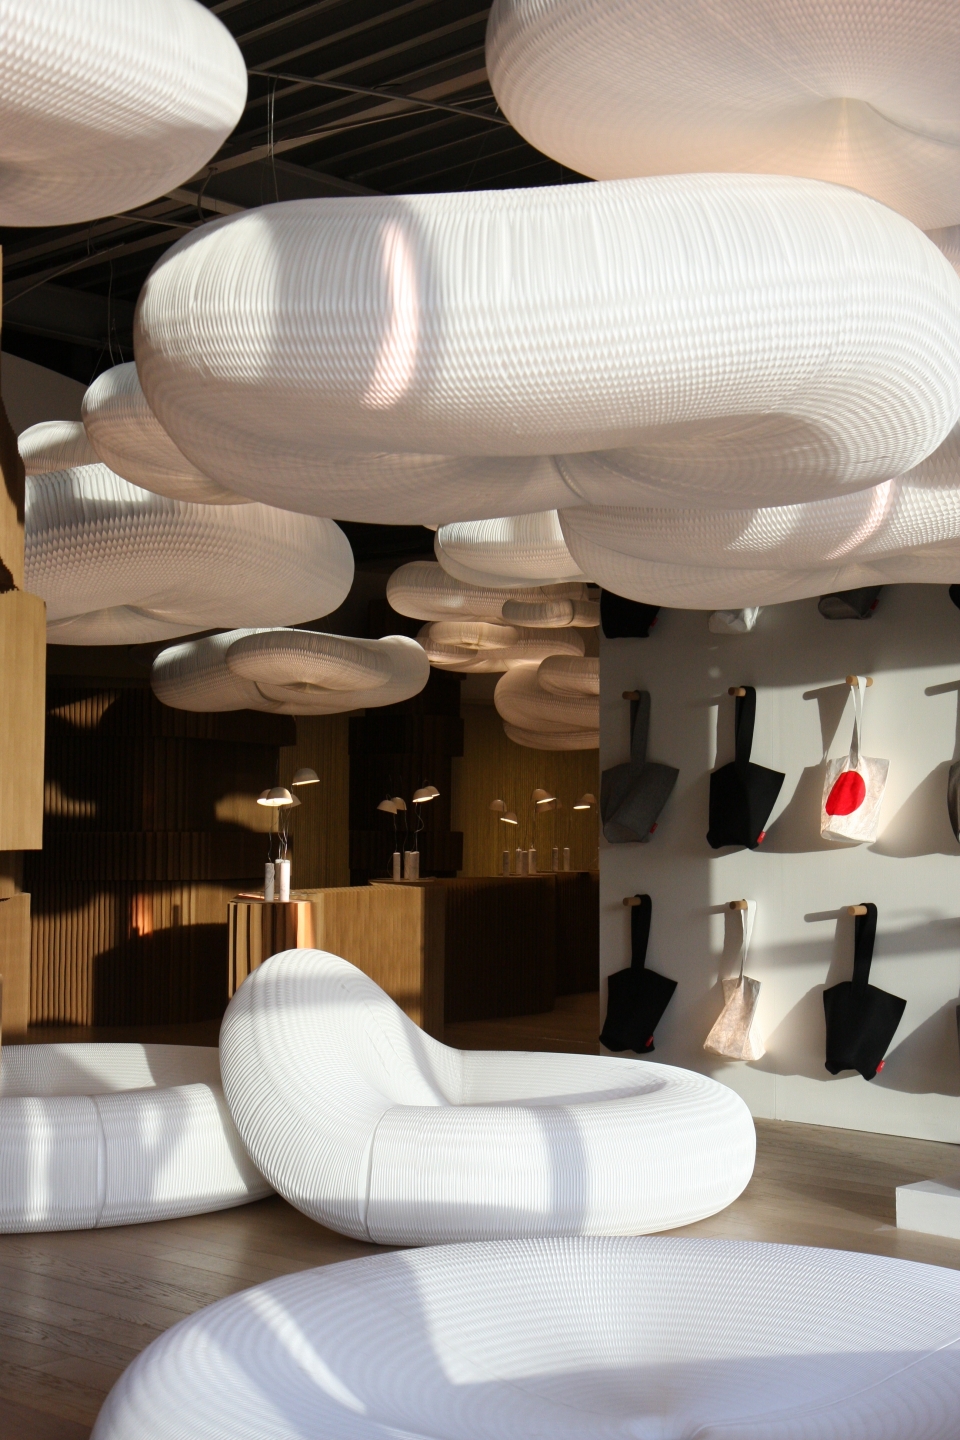 textile loungers create striking mirrors to the clouds floating above.